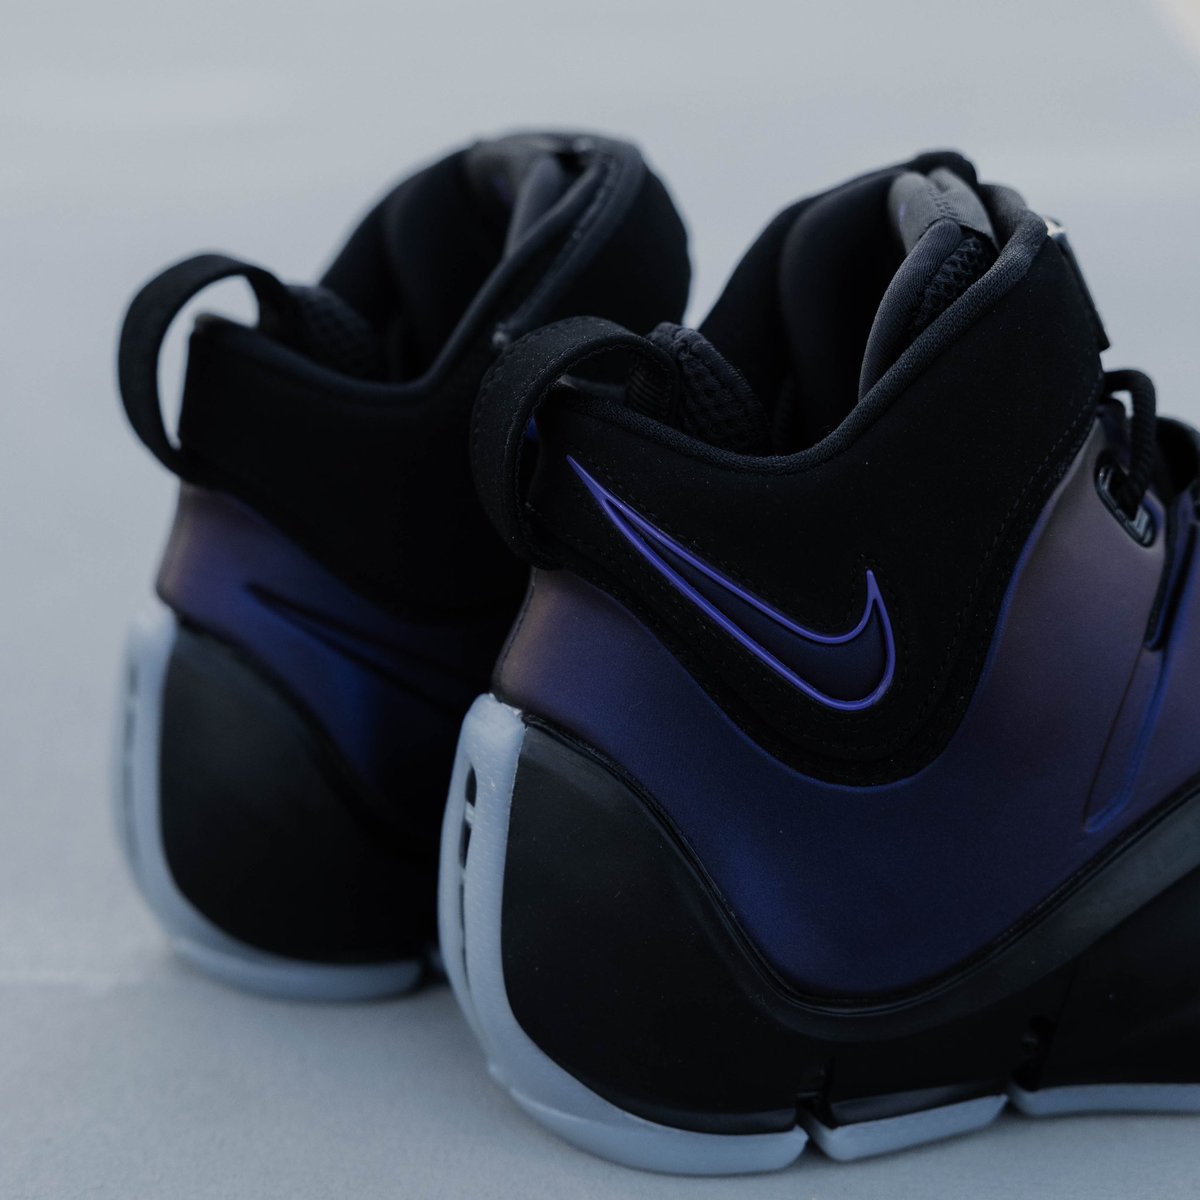 Nike Lebron IV 'Eggplant' Men’s Sizes 7-15 ($250) Available 5/8 at 9 AM CST First Come, First Serve Online TheBetterGeneration.com & TBG App Originally released in 2006, LeBron's 4th signature model is back in action. Adorned with the King's logo and branding from the…